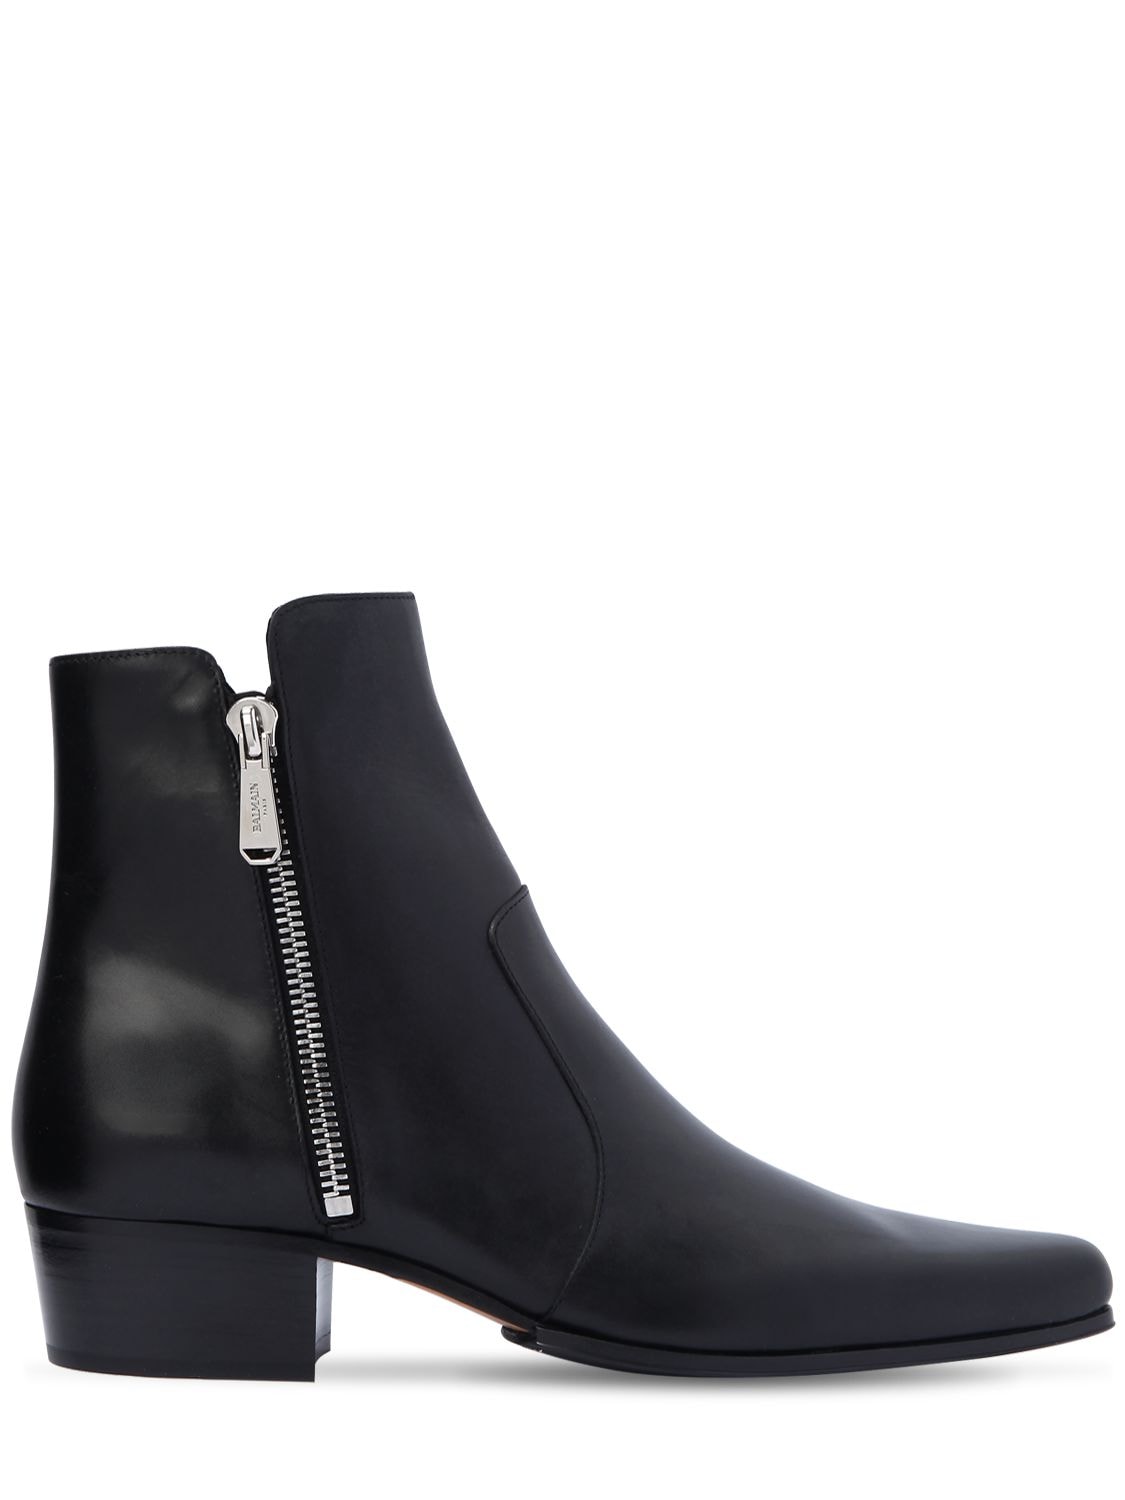 BALMAIN 35MM ANTHOS ZIP LEATHER ANKLE BOOTS,67IG8P007-MTc20